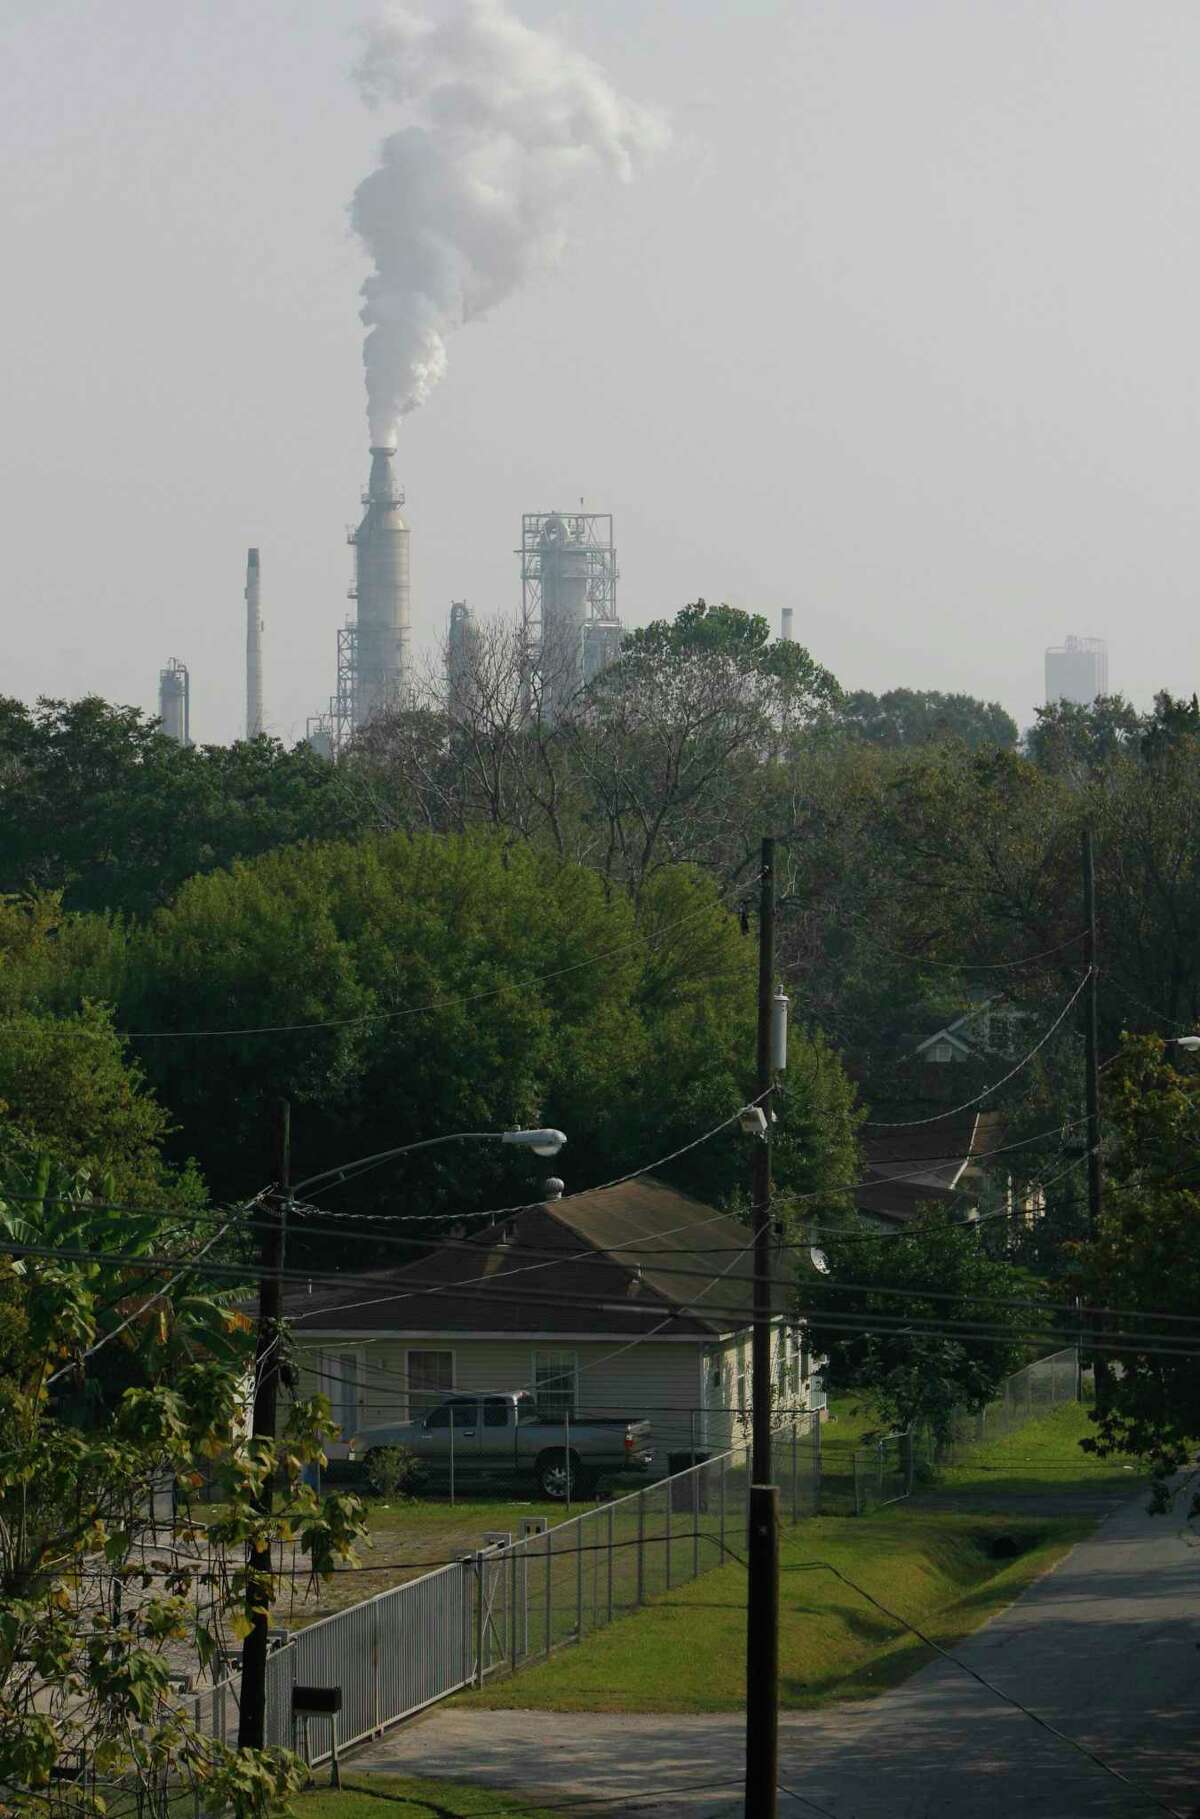 The Manchester neighborhood located in Houston's East End is next to the ship channel and several petrochemical plants.